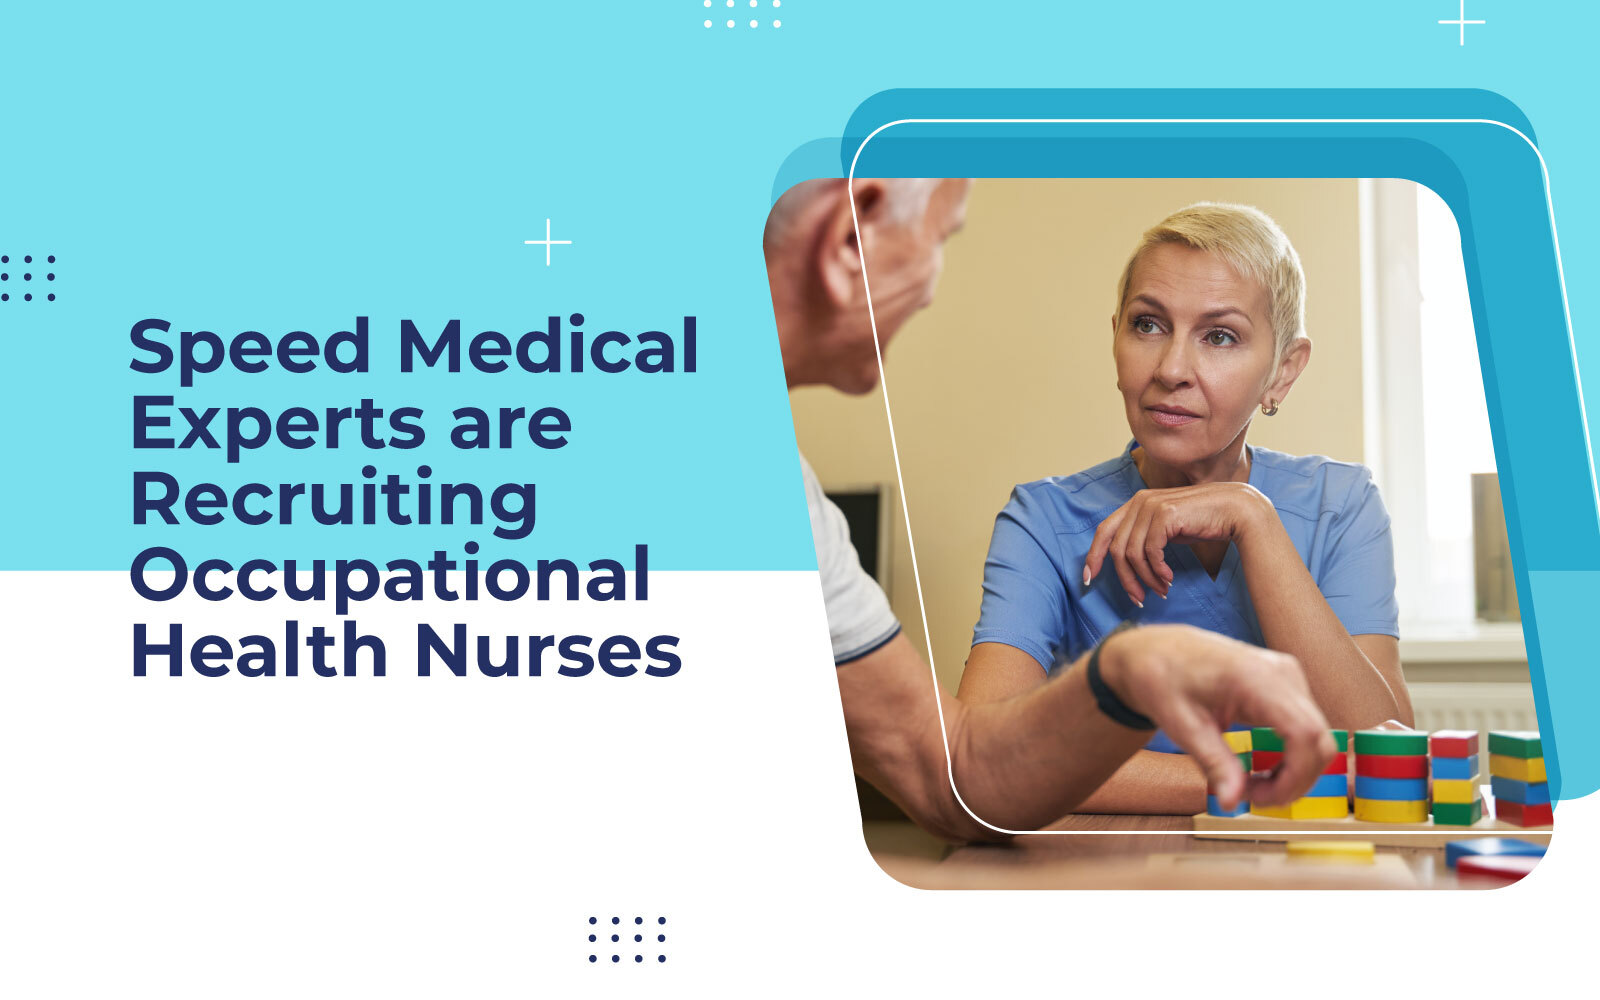 Speed Medical are Recruiting Occupational Health Nurses